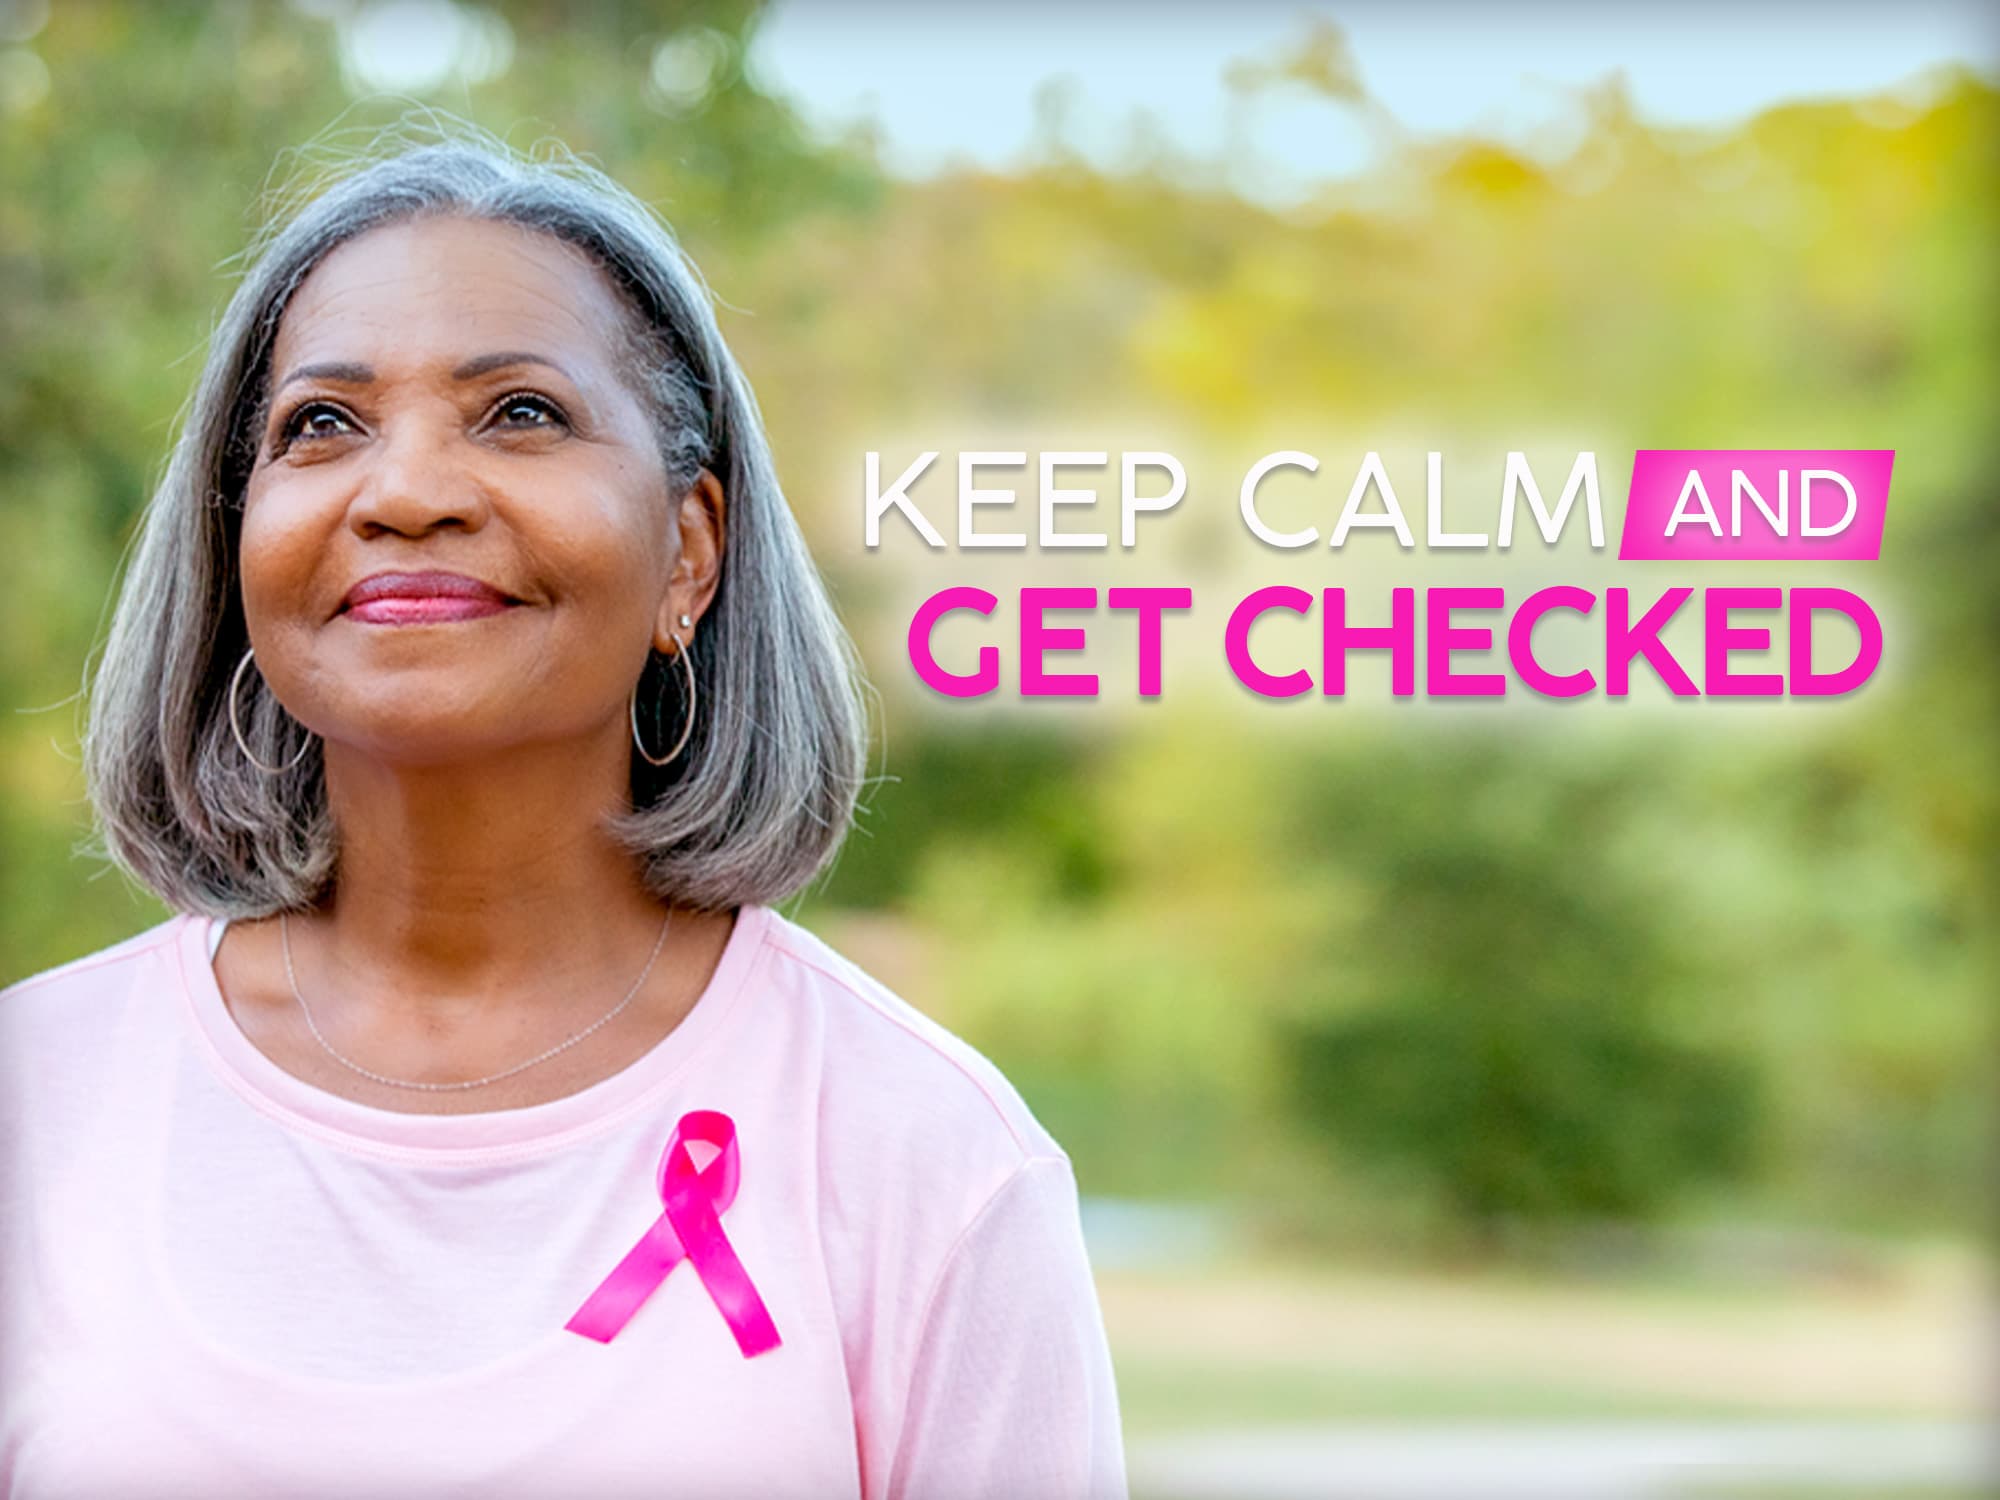 Consult provider, don't panic about lump in breast - University of  Mississippi Medical Center